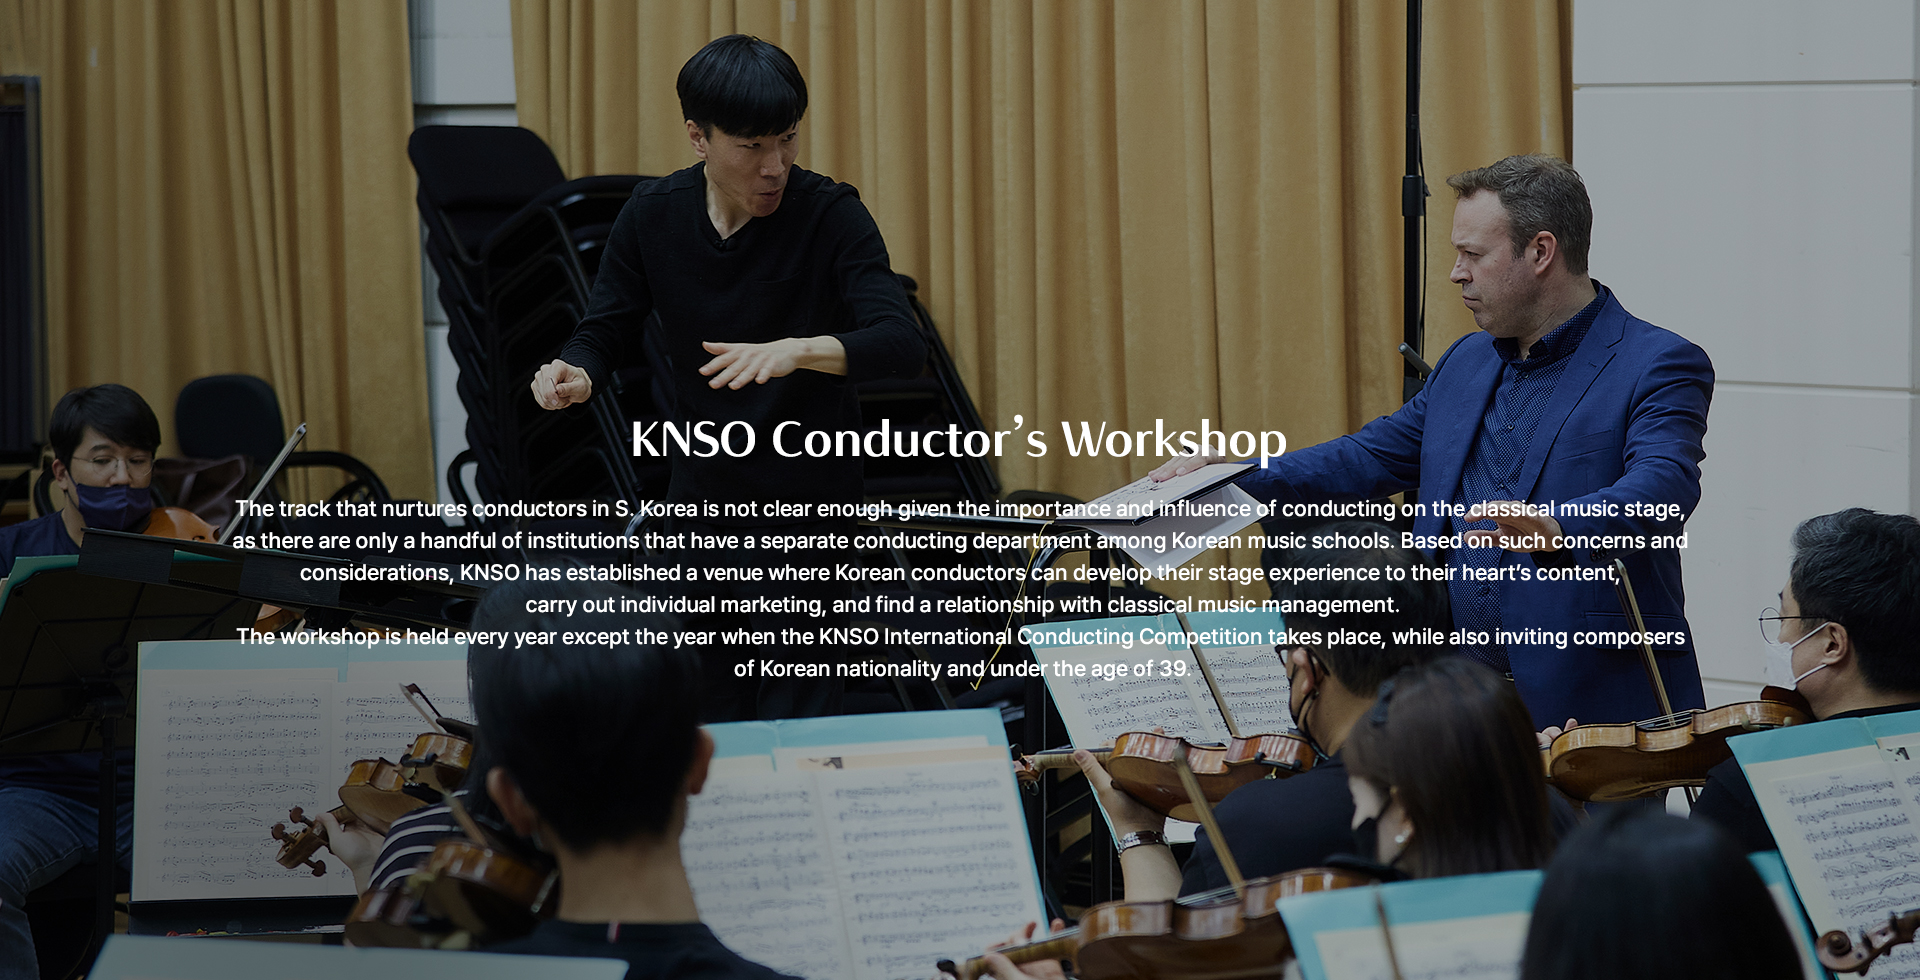 KNSO Conductor’s Workshop The track that nurtures conductors in S. Korea is not clear enough given the importance and influence of conducting on the classical music stage, as there are only a handful of institutions that have a separate conducting department among Korean music schools. Based on such concerns and considerations, KNSO has established a venue where Korean conductors can develop their stage   experience to their heart’s content, carry out individual marketing, and find a relationship with classical music management. The workshop is held every year except the year when the KNSO International Conducting Competition takes place, while also inviting composers of Korean nationality and under the age of 39. 